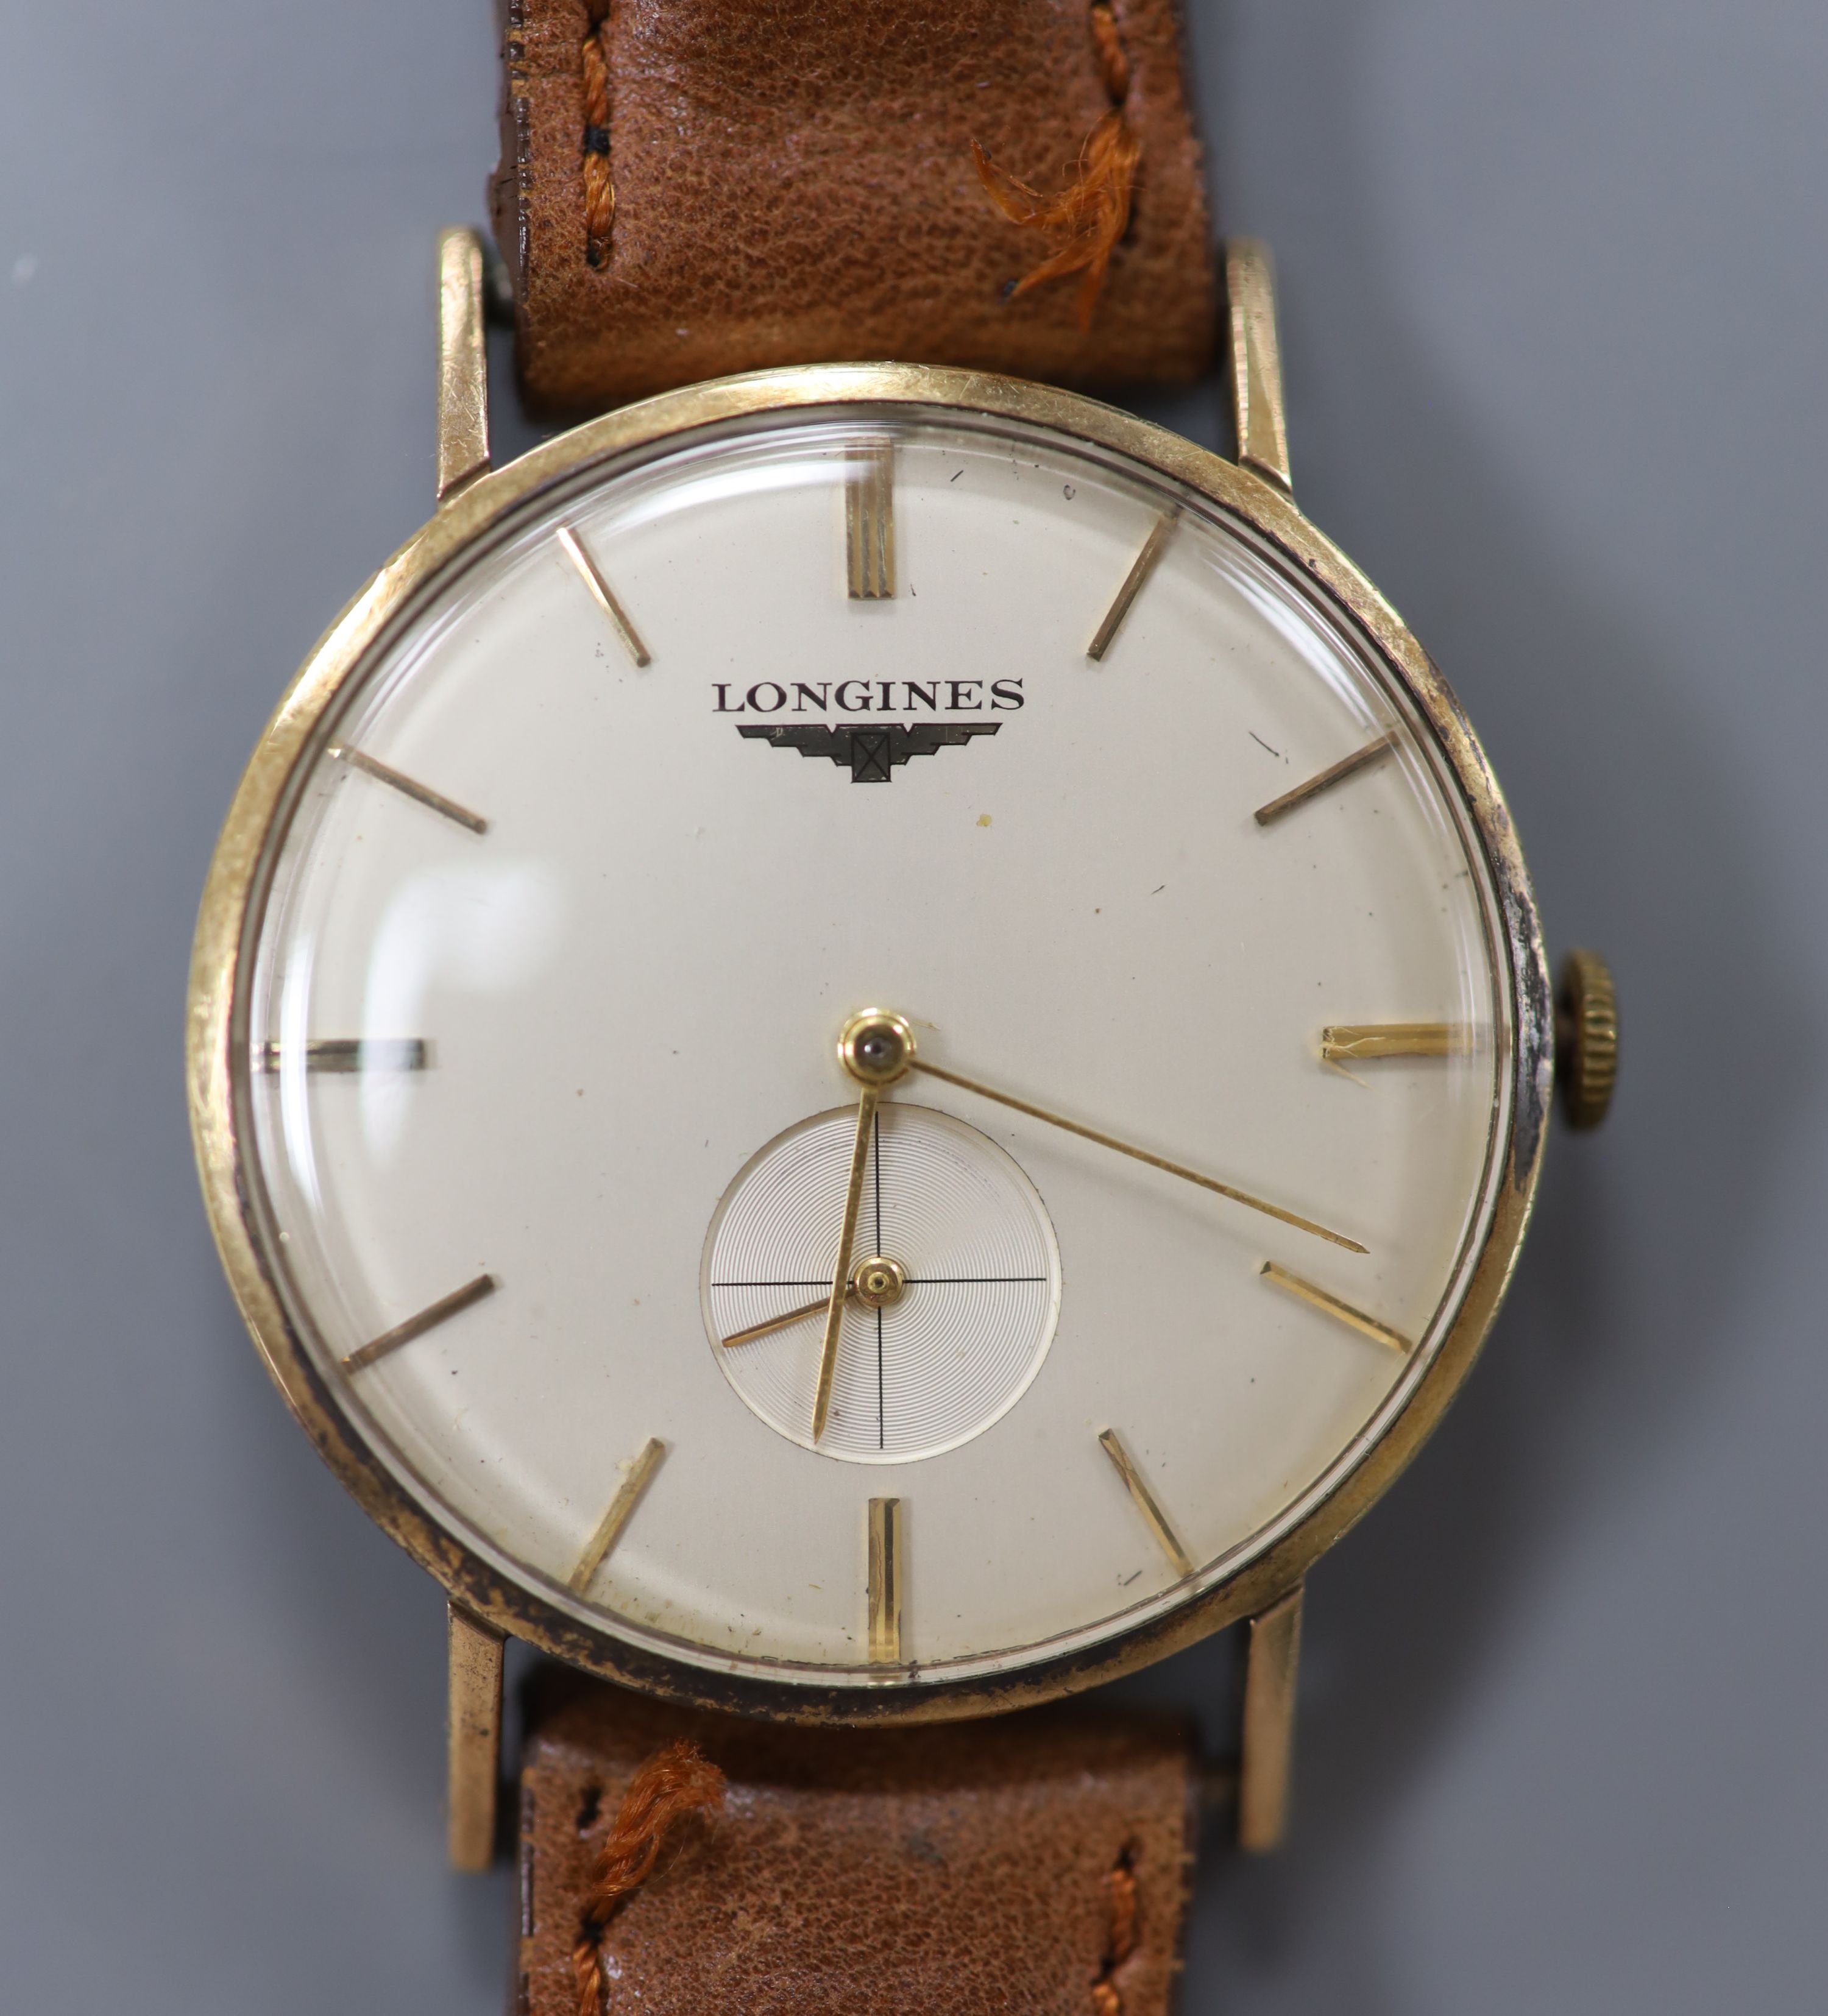 A gentleman's late 1950's 9ct gold Longines manual wind wrist watch, on a leather strap, case diameter 31mm, gross 27.2 grams.